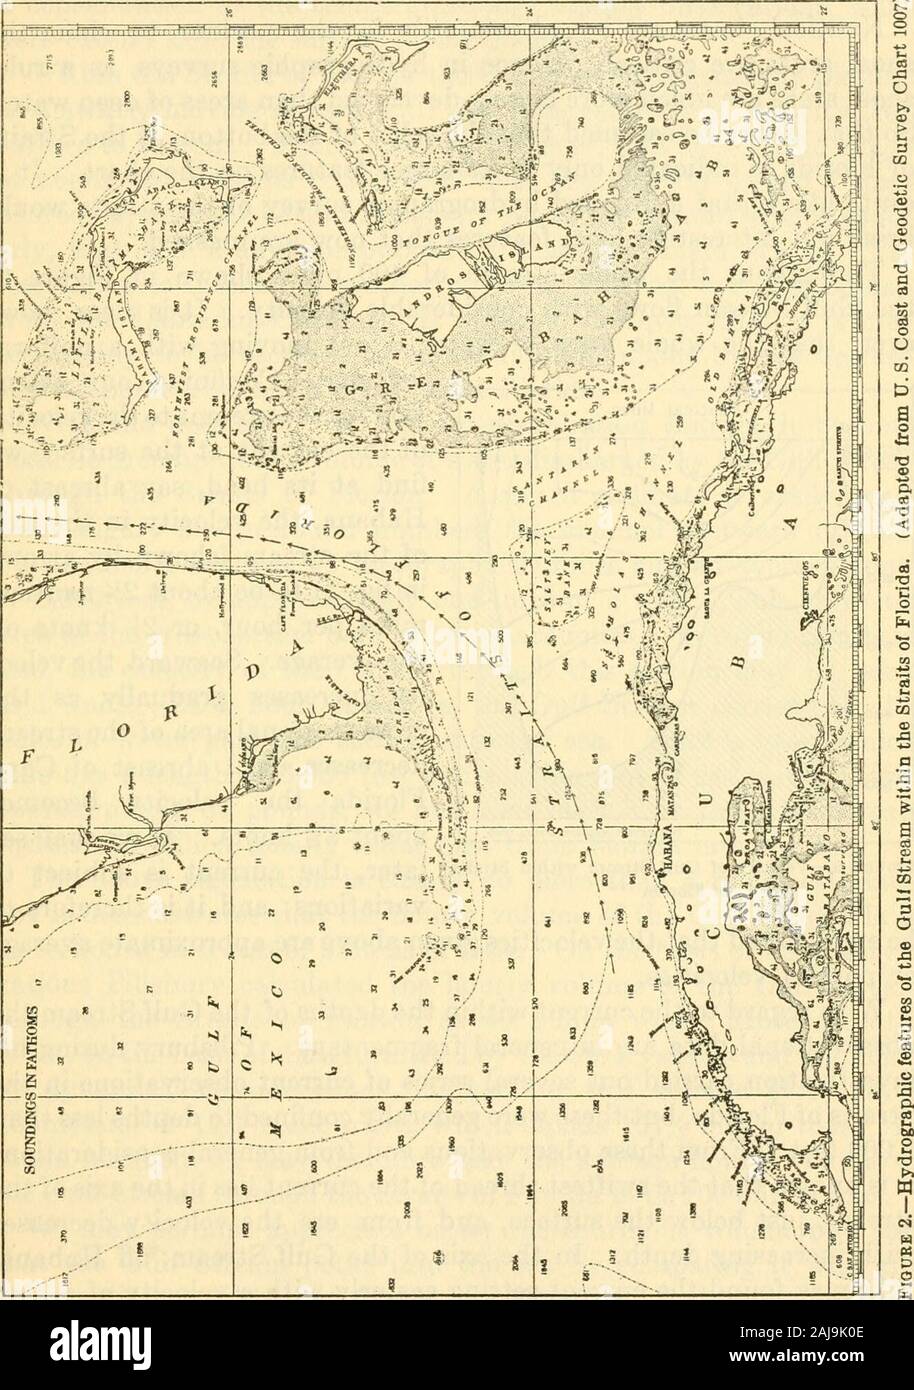 Annual report of the Board of Regents of the Smithsonian Institution . he region where the Gulf of Mexiconarrows to form the channel between Florida Keys and Cuba may beregarded as the head of the Gulf Stream. Here the width of itschannel is 95 nautical miles. Eastward the channel becomes nar-rower, reaching its least width in the so-called narrows, abreast ofCape Florida, where it is but half its original width. From here itwidens somewhat until it meets the open sea north of Little BahamaBank. otto Kriimmel: Handbuch der Ozeanographie, 2 vols., Stuttgart, 1907-1911. • Gerhard Schott: Geograp Stock Photo